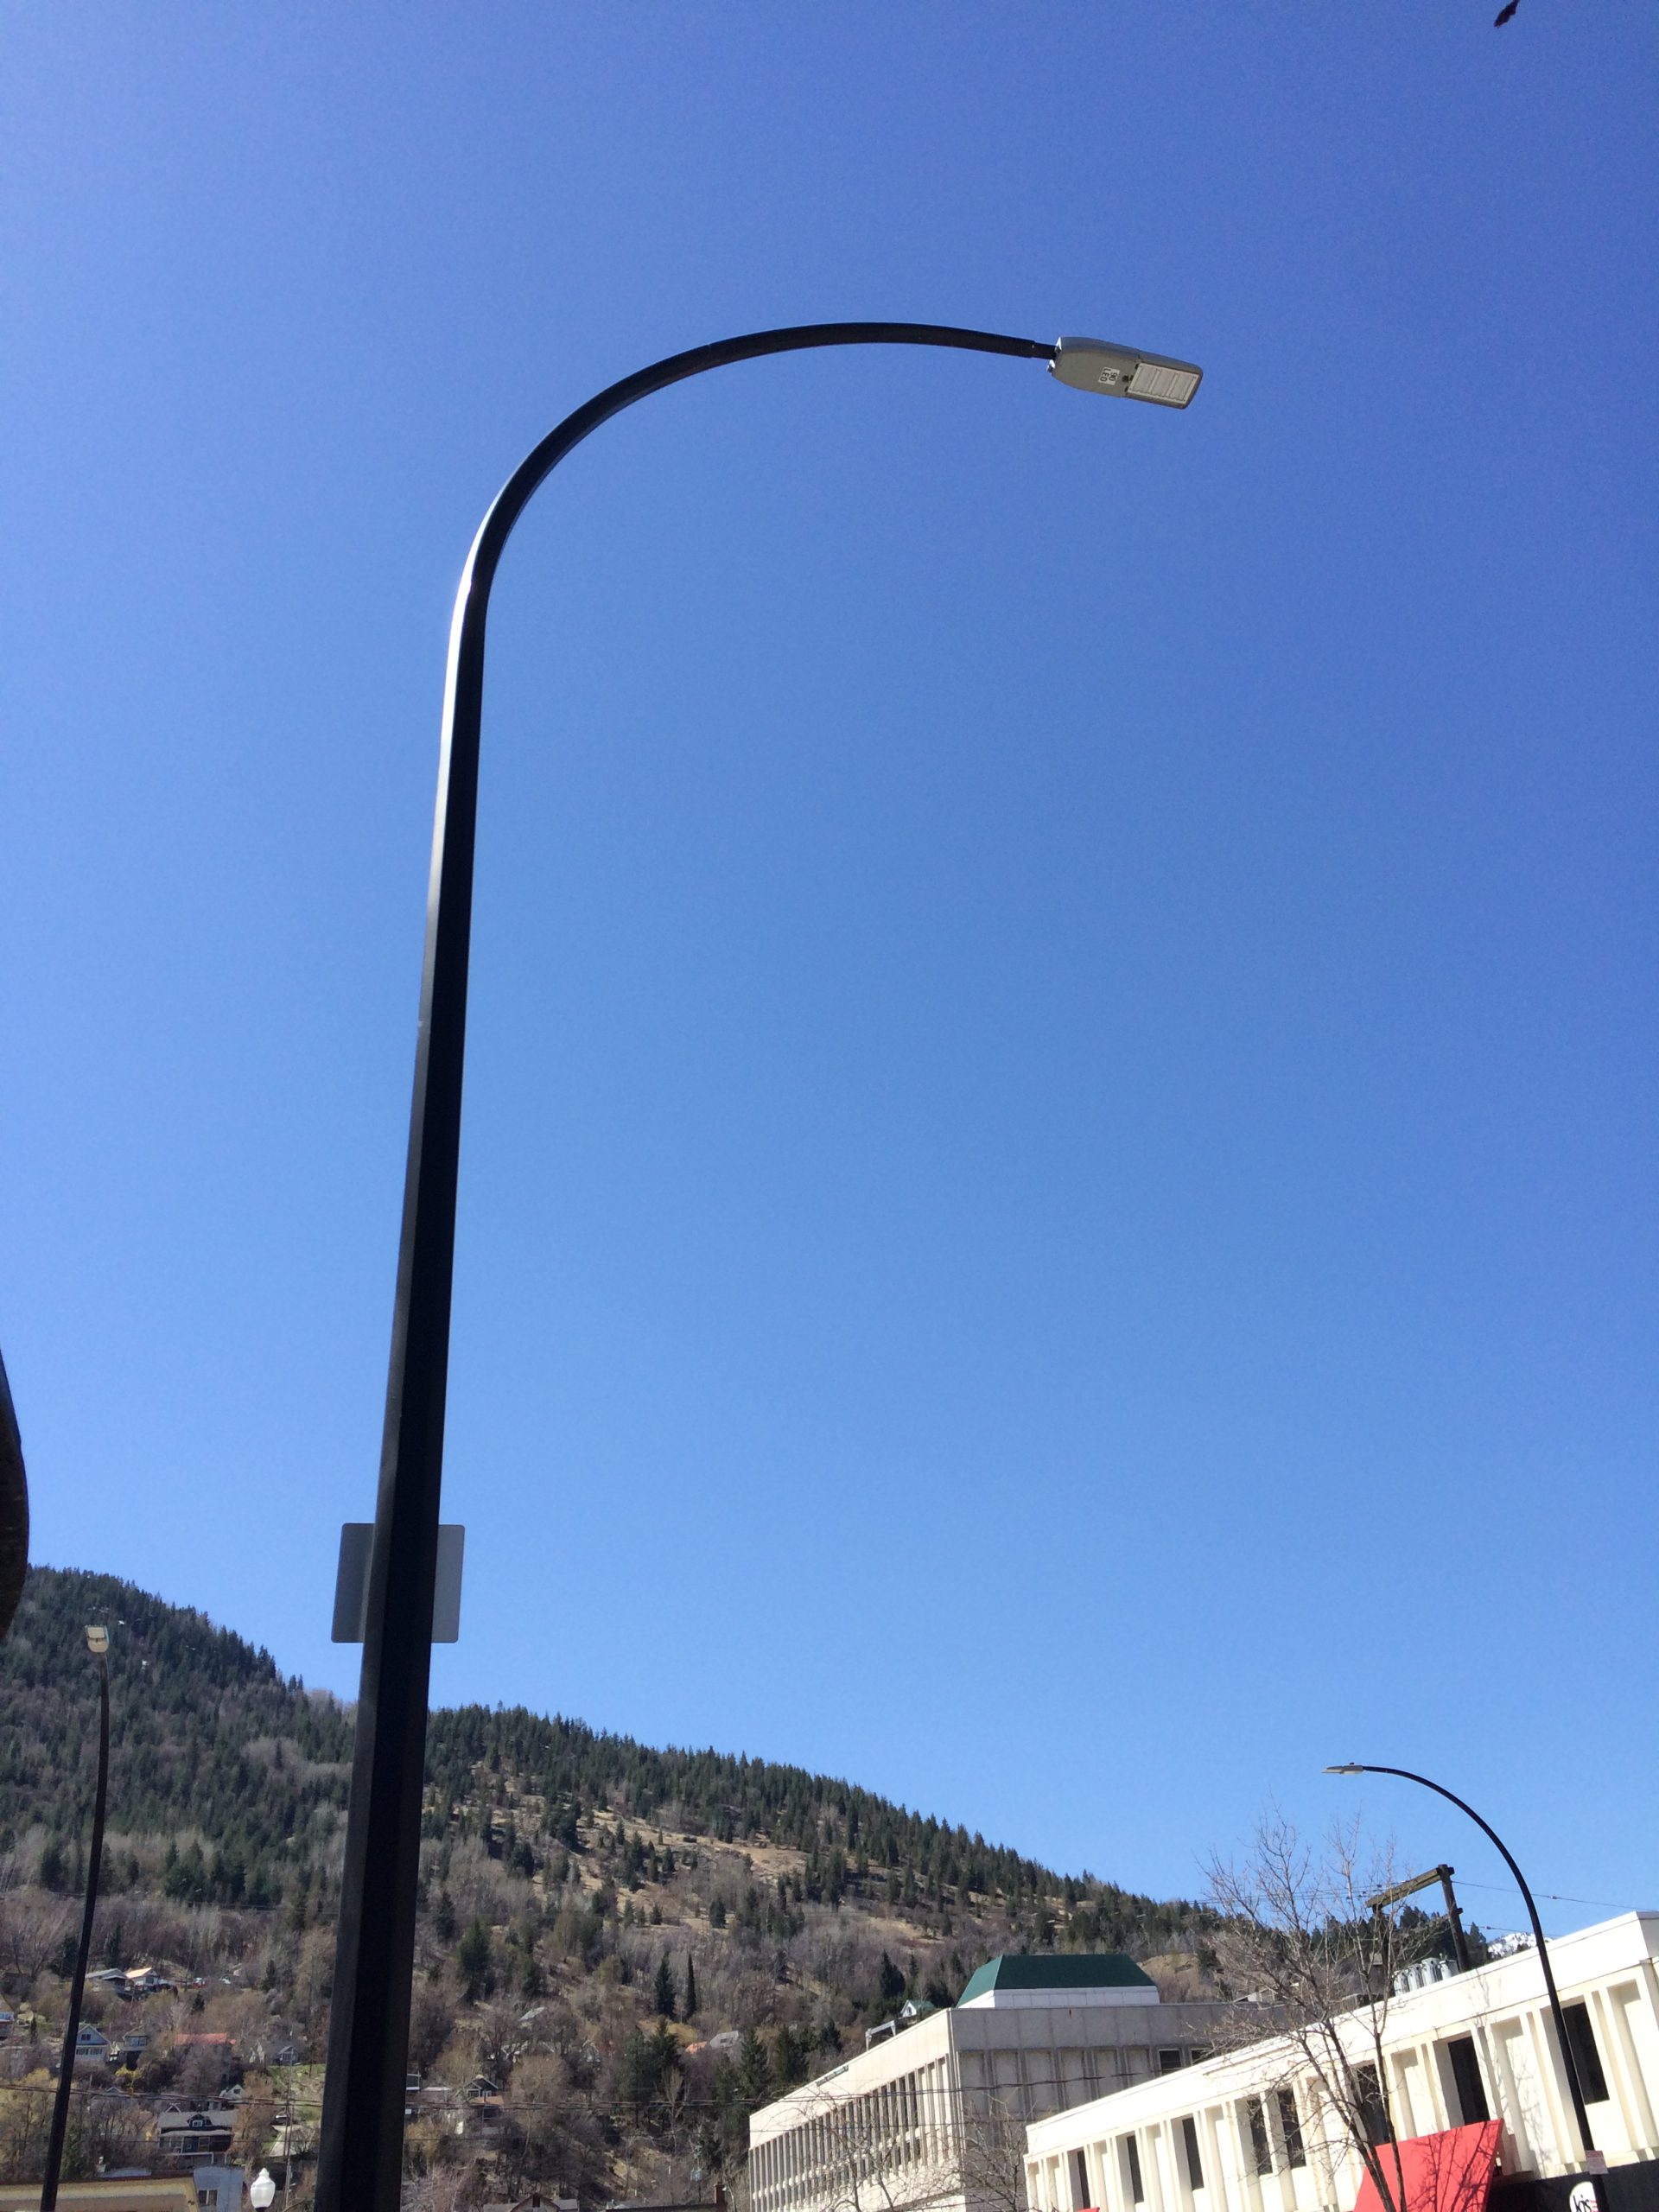 Trail streetlight project recognized at city council meeting